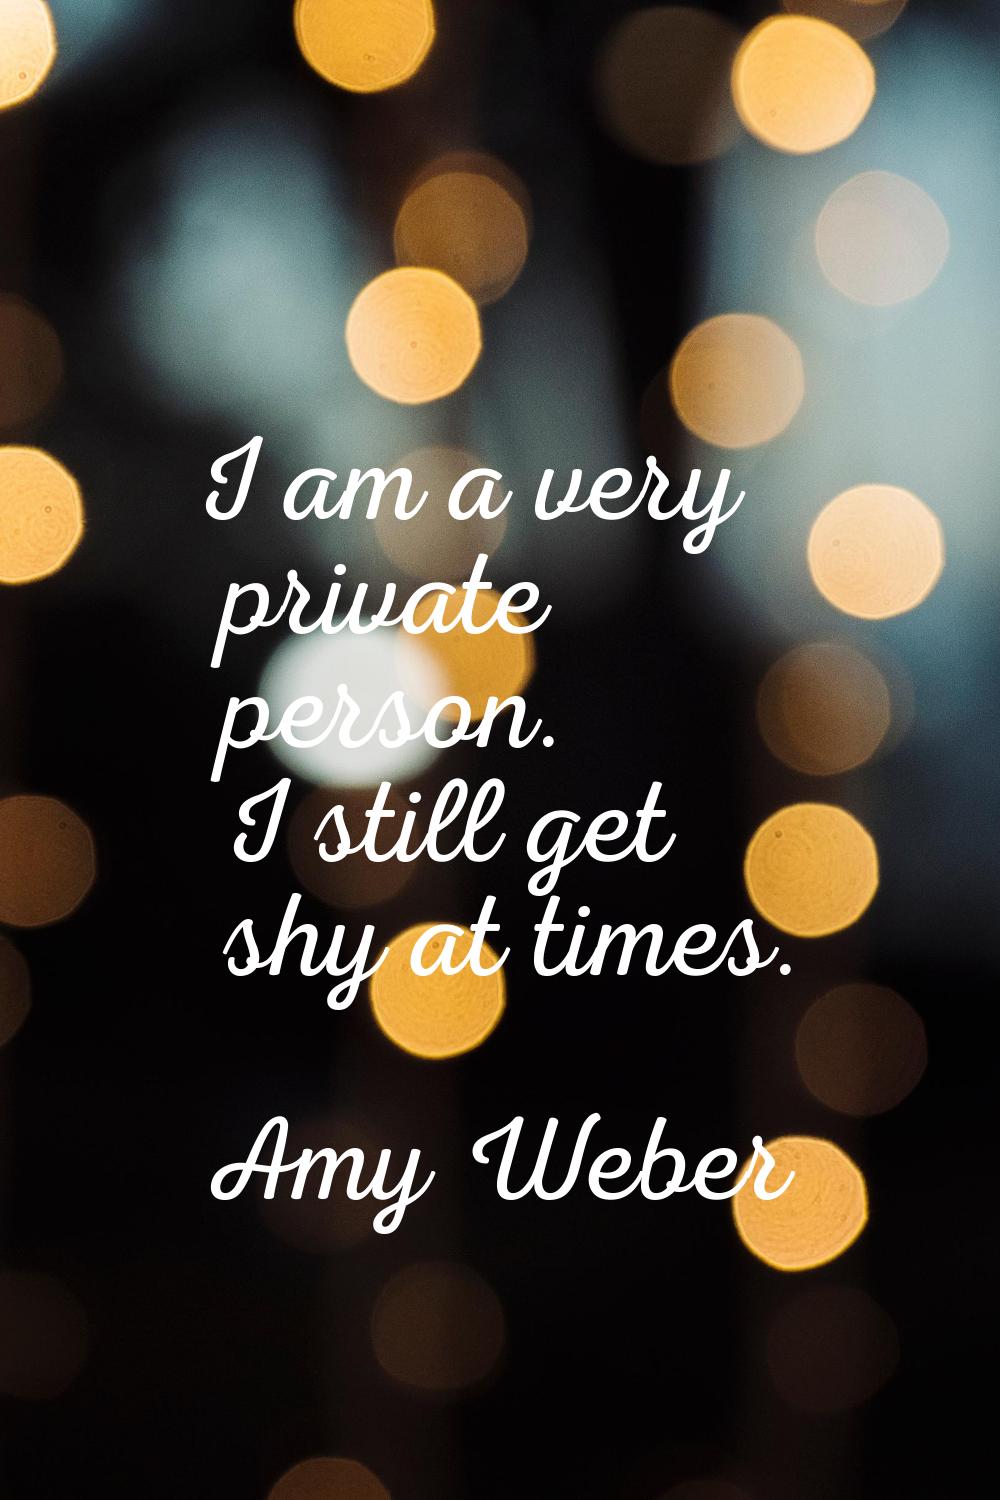 I am a very private person. I still get shy at times.